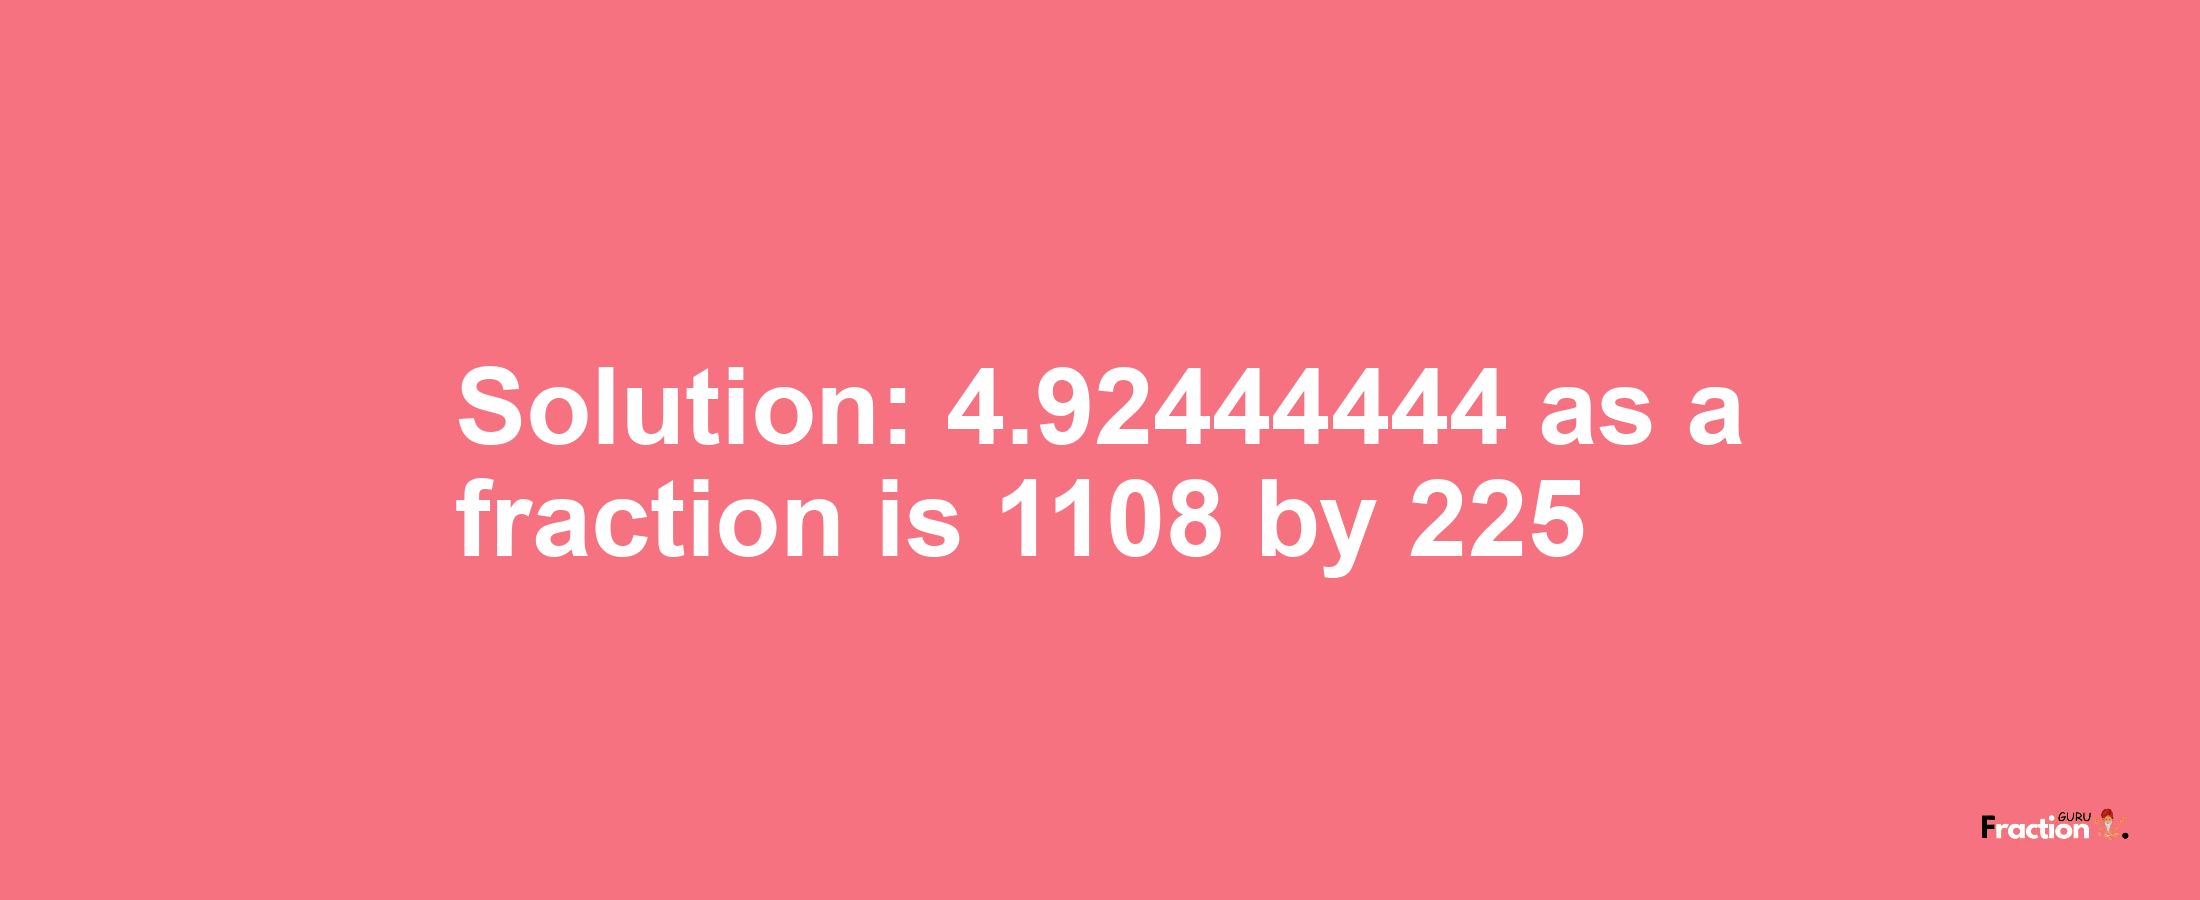 Solution:4.92444444 as a fraction is 1108/225